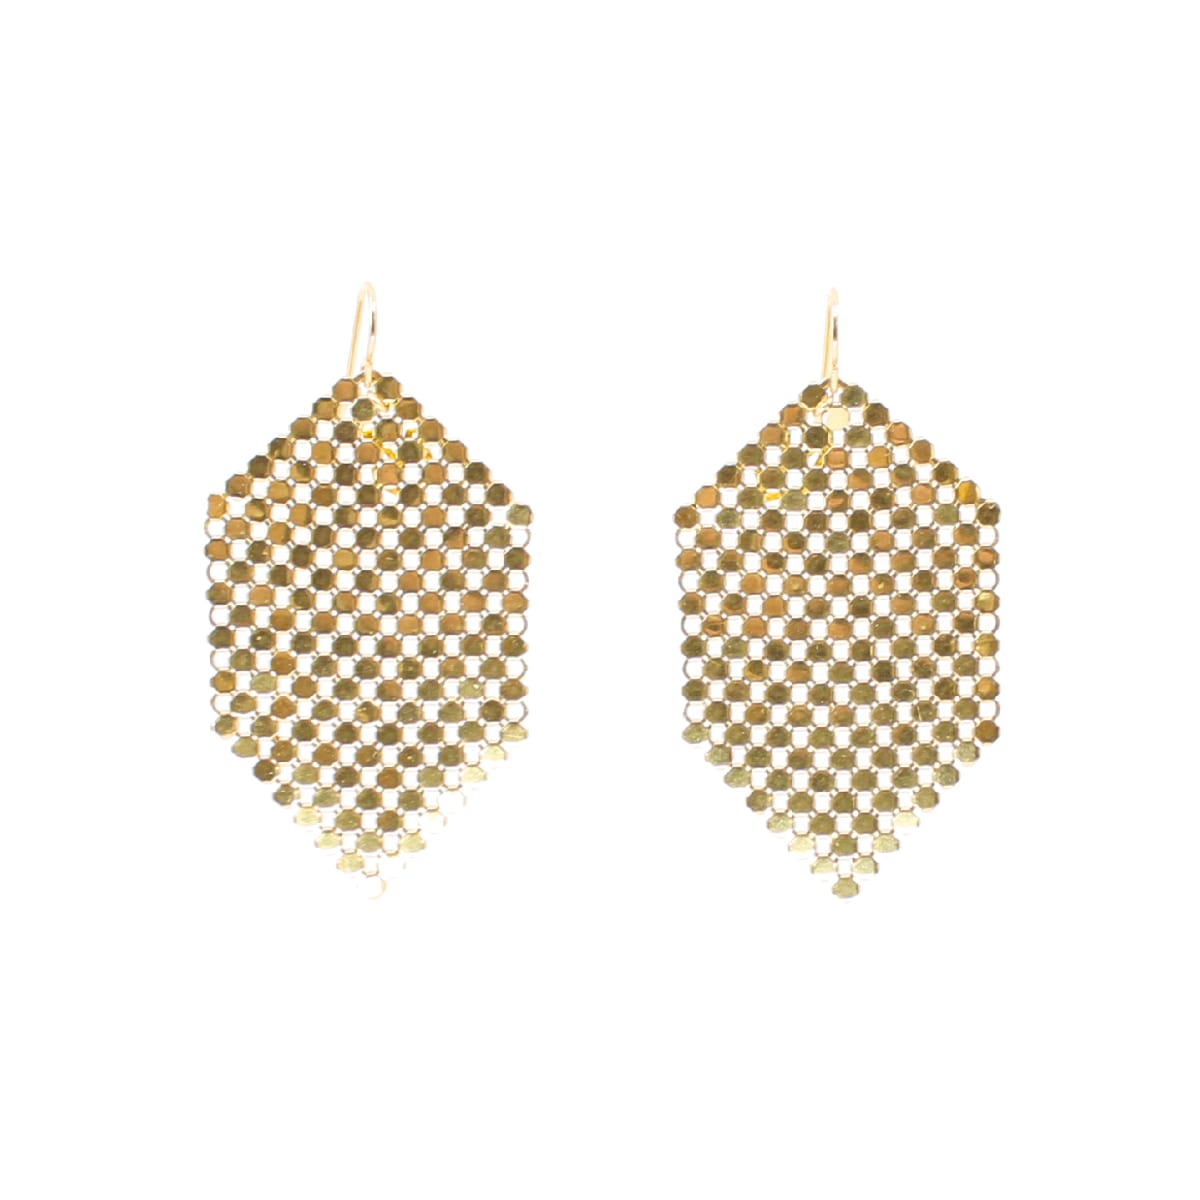 GOLD MESH BANNER EARRINGS by Maral Rapp  Image: Iconic metal mesh reclaimed from a vintage purse (circa 1940s-80s.